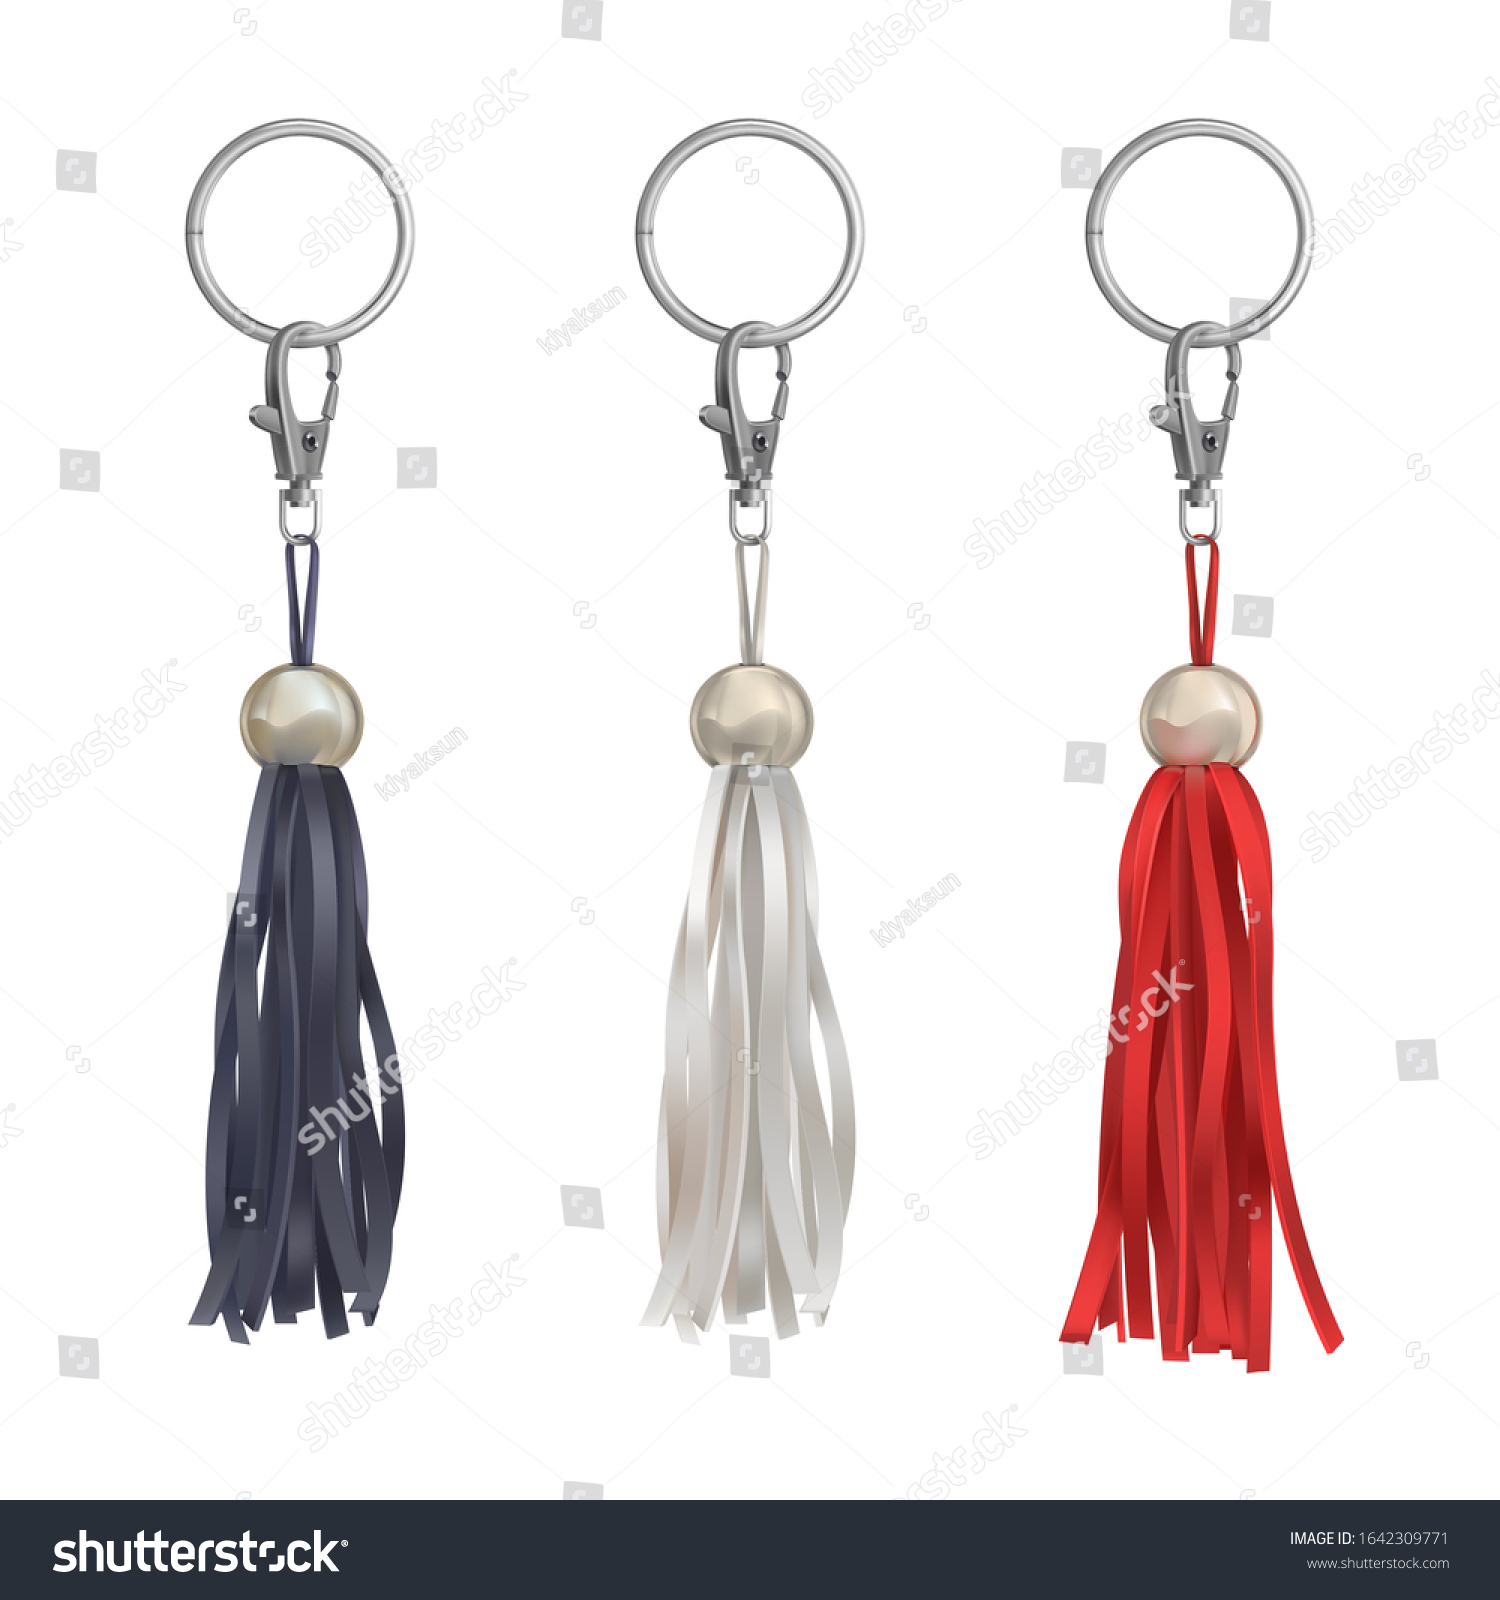 SVG of Trinkets with leather tassel for handbag, zipper or keyring. Vector realistic of pendant with black, white and red fringe, bead and puller isolated on white background svg